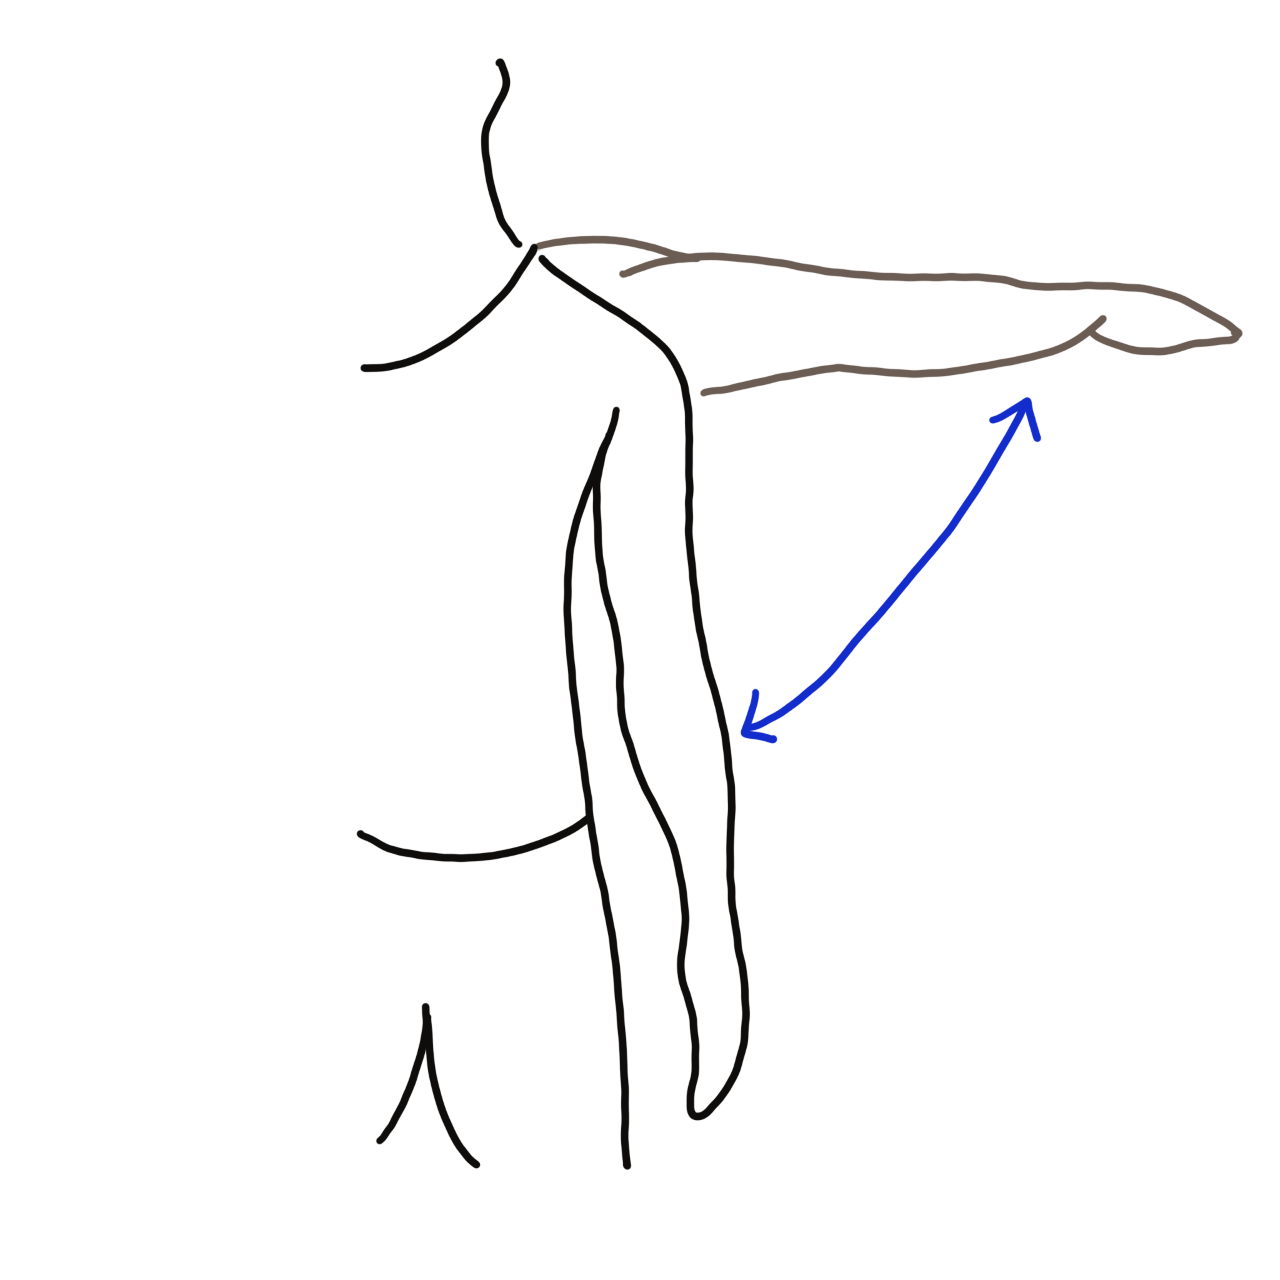 correct form for a correct side view of a raise